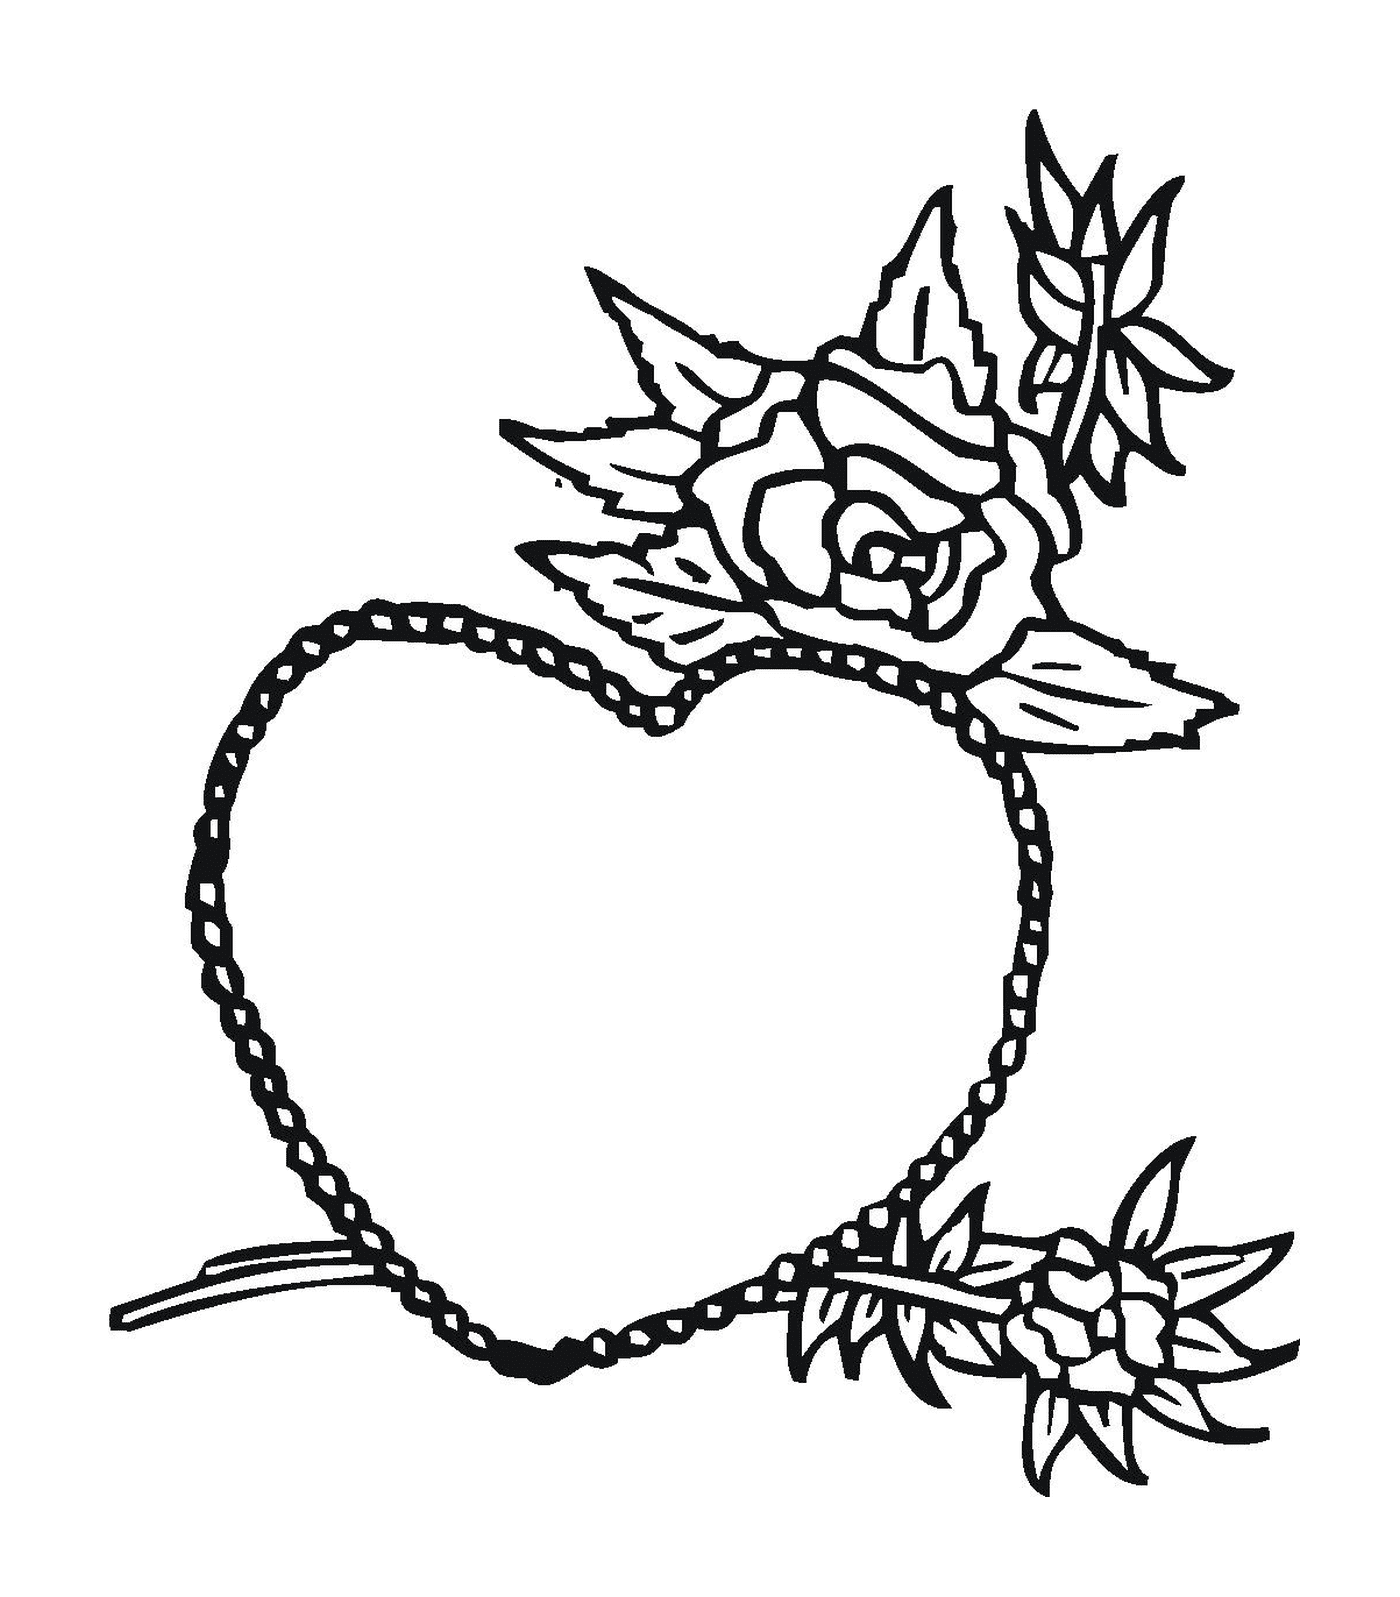  A heart and flowers 